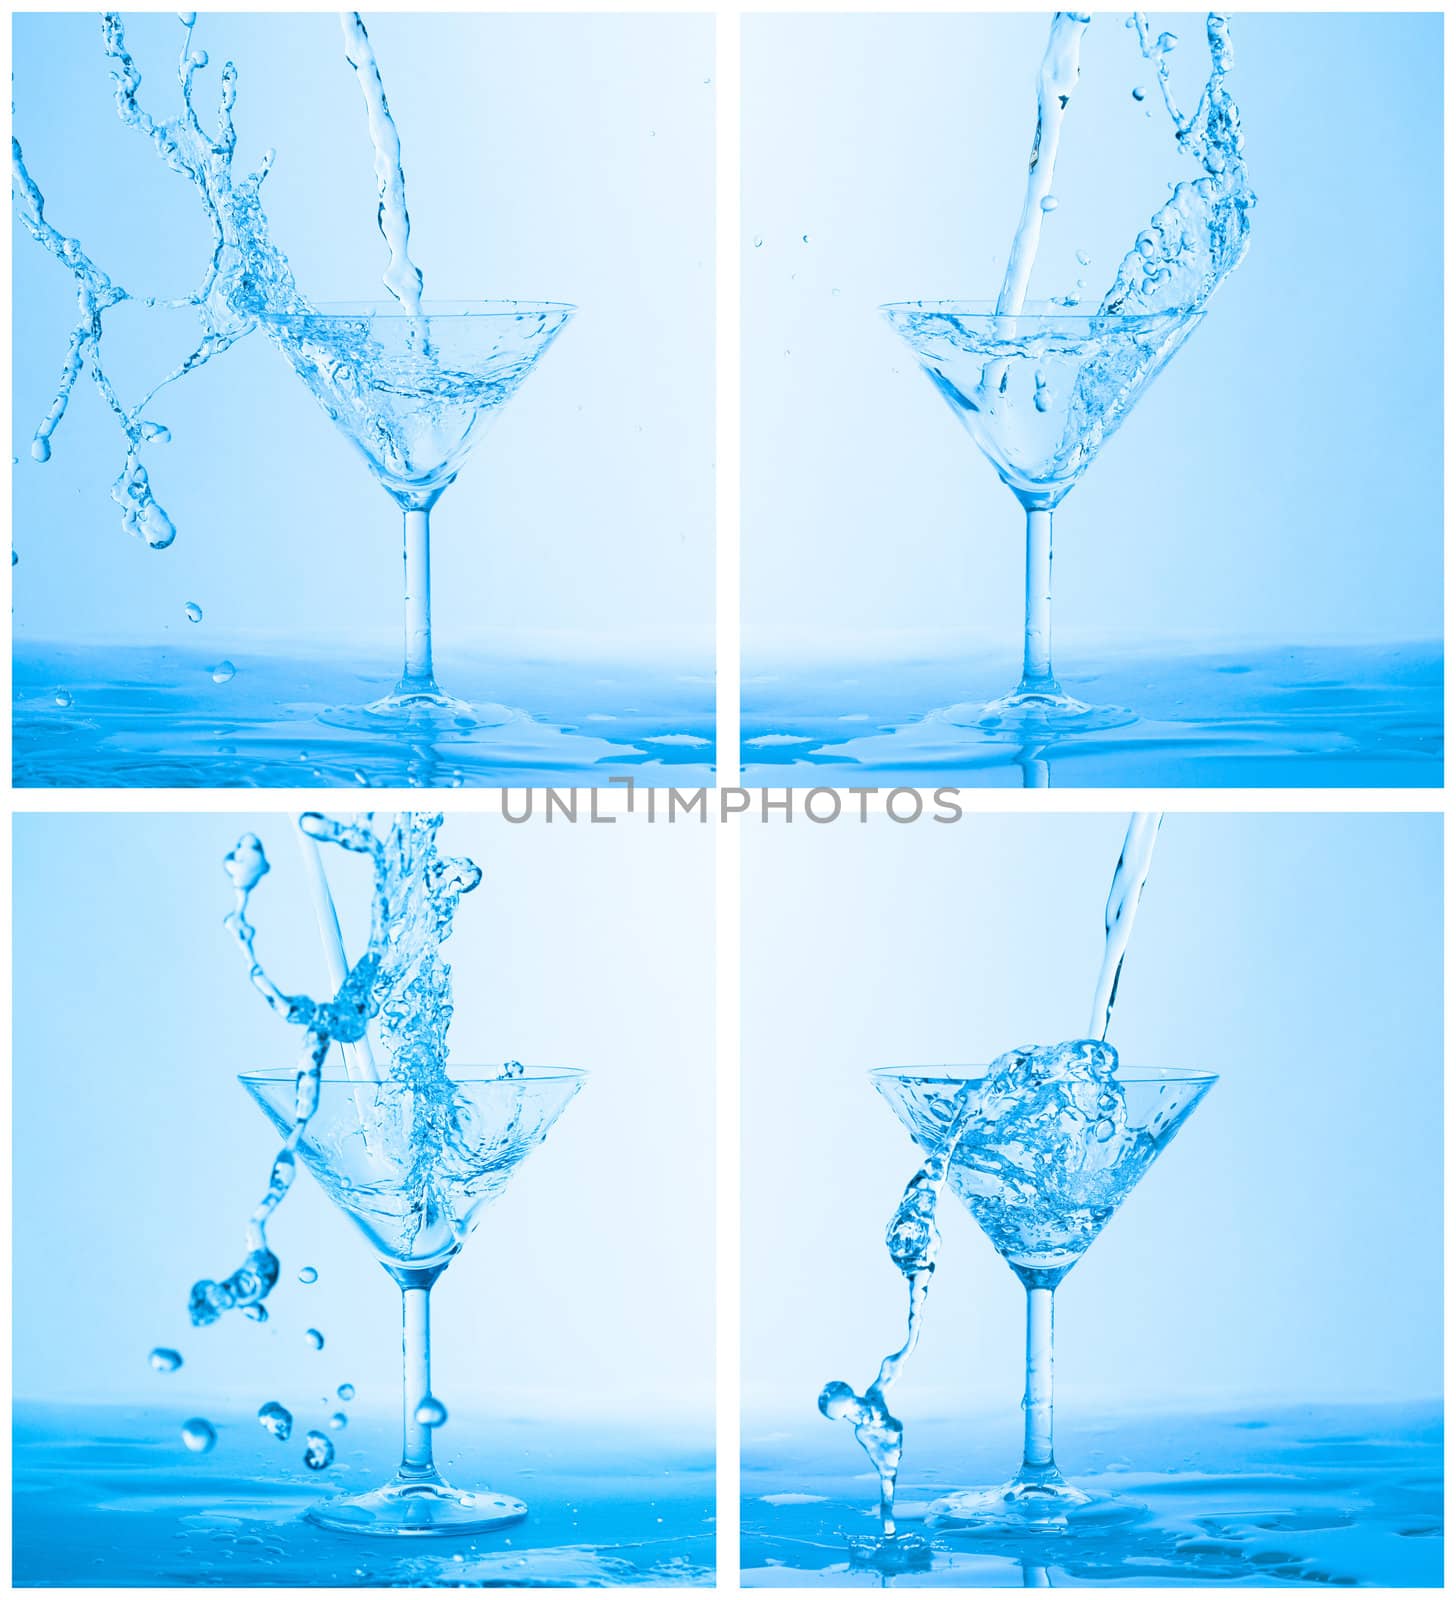 Collage of Water Splashing in a Wineglass by Discovod